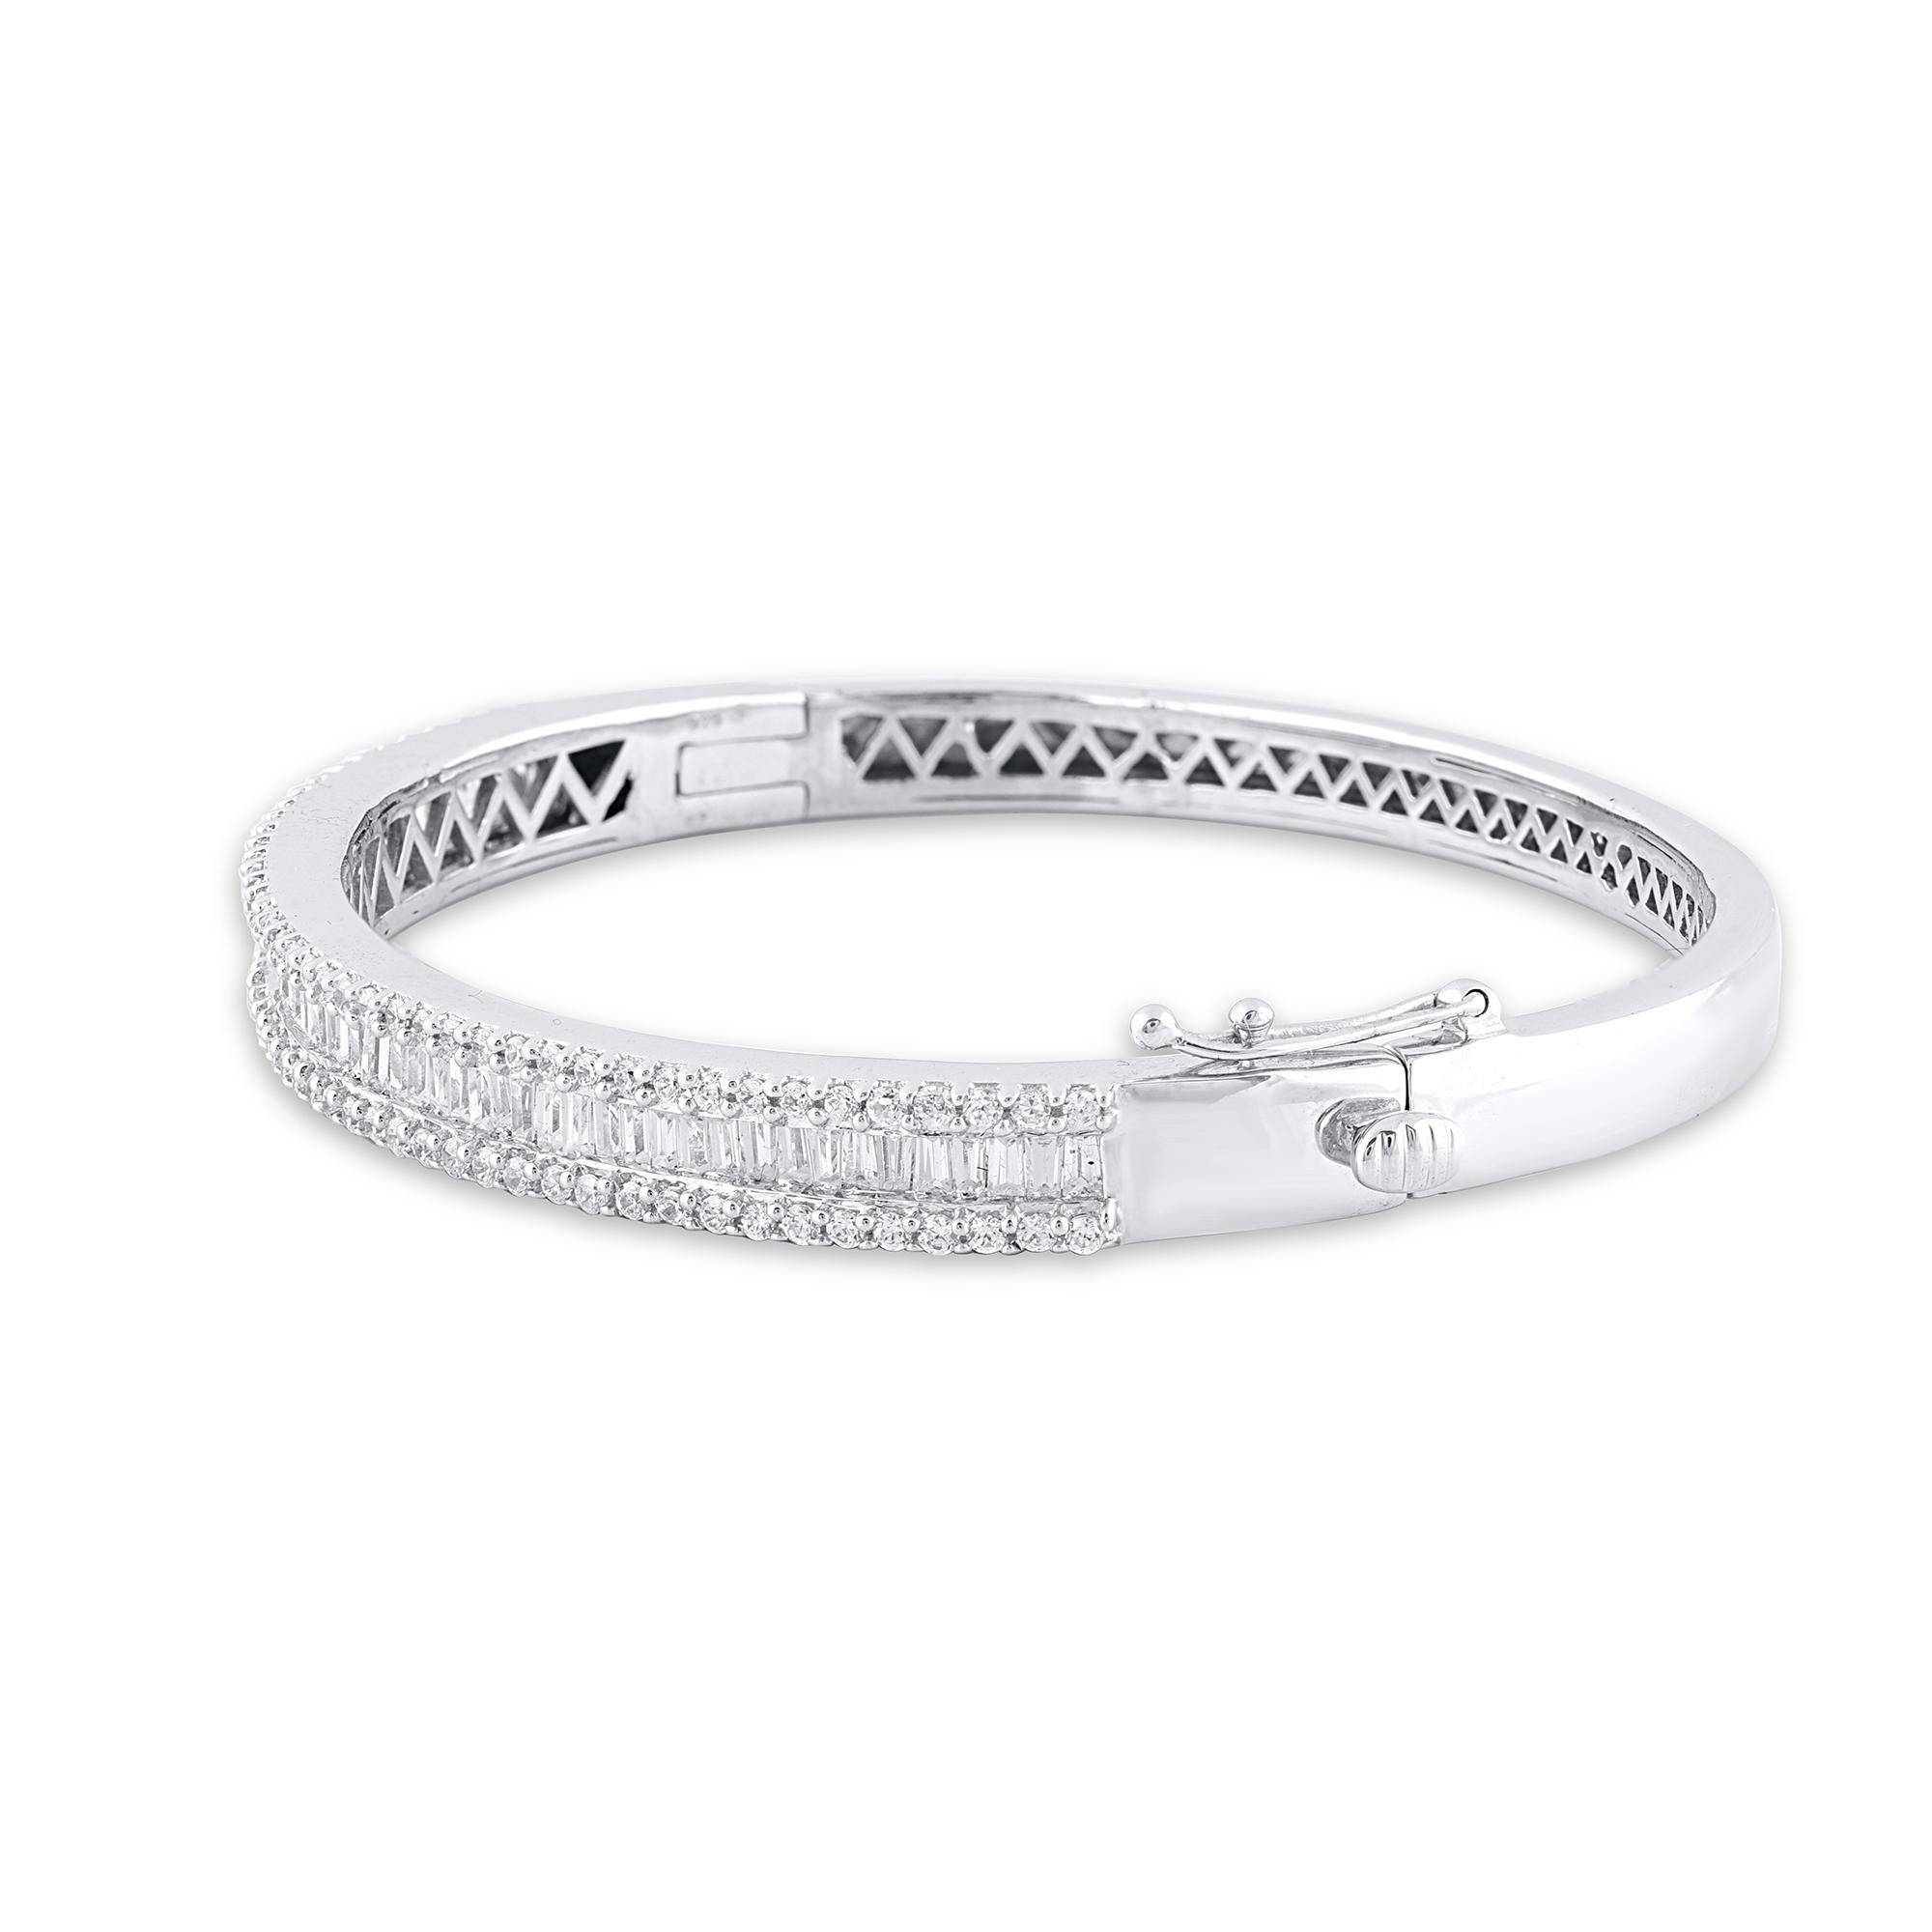 She'll love this tennis-look diamond bangle so much she won't ever want to take it off. This bangle showcase the round brilliant-cut and baguette-cut diamond in channel and bead setting and crafted by our inhouse experts in 18 karat white gold. The